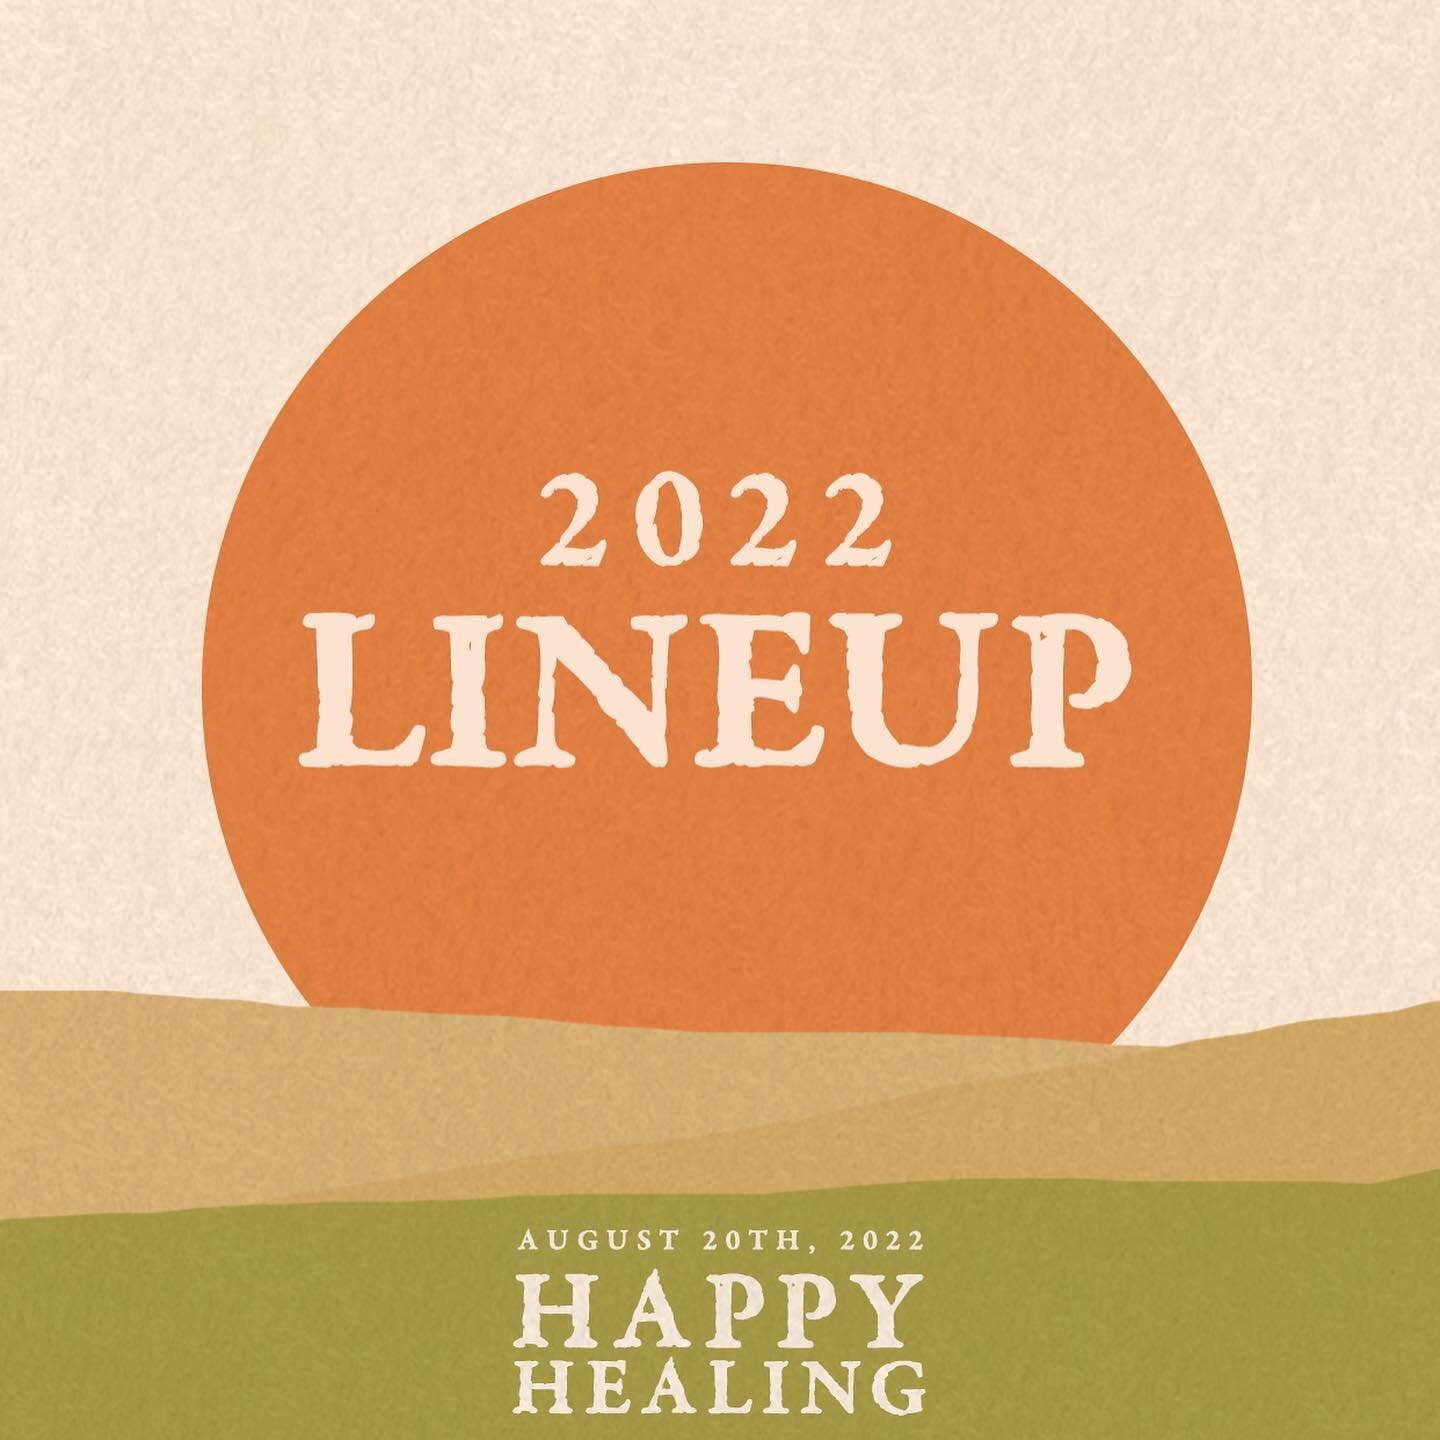 2022 LINEUP!!!

I cannot emphasize enough how excited I am to welcome each of these phenomenal musicians to the Happy Healing Fest stage!

@thelowlies 
@pure_kahrin 
@toreistori 
@sally_brooks_yoga 
@gingerwixxandthejeweltones 
@morganmecaskey 
@beth